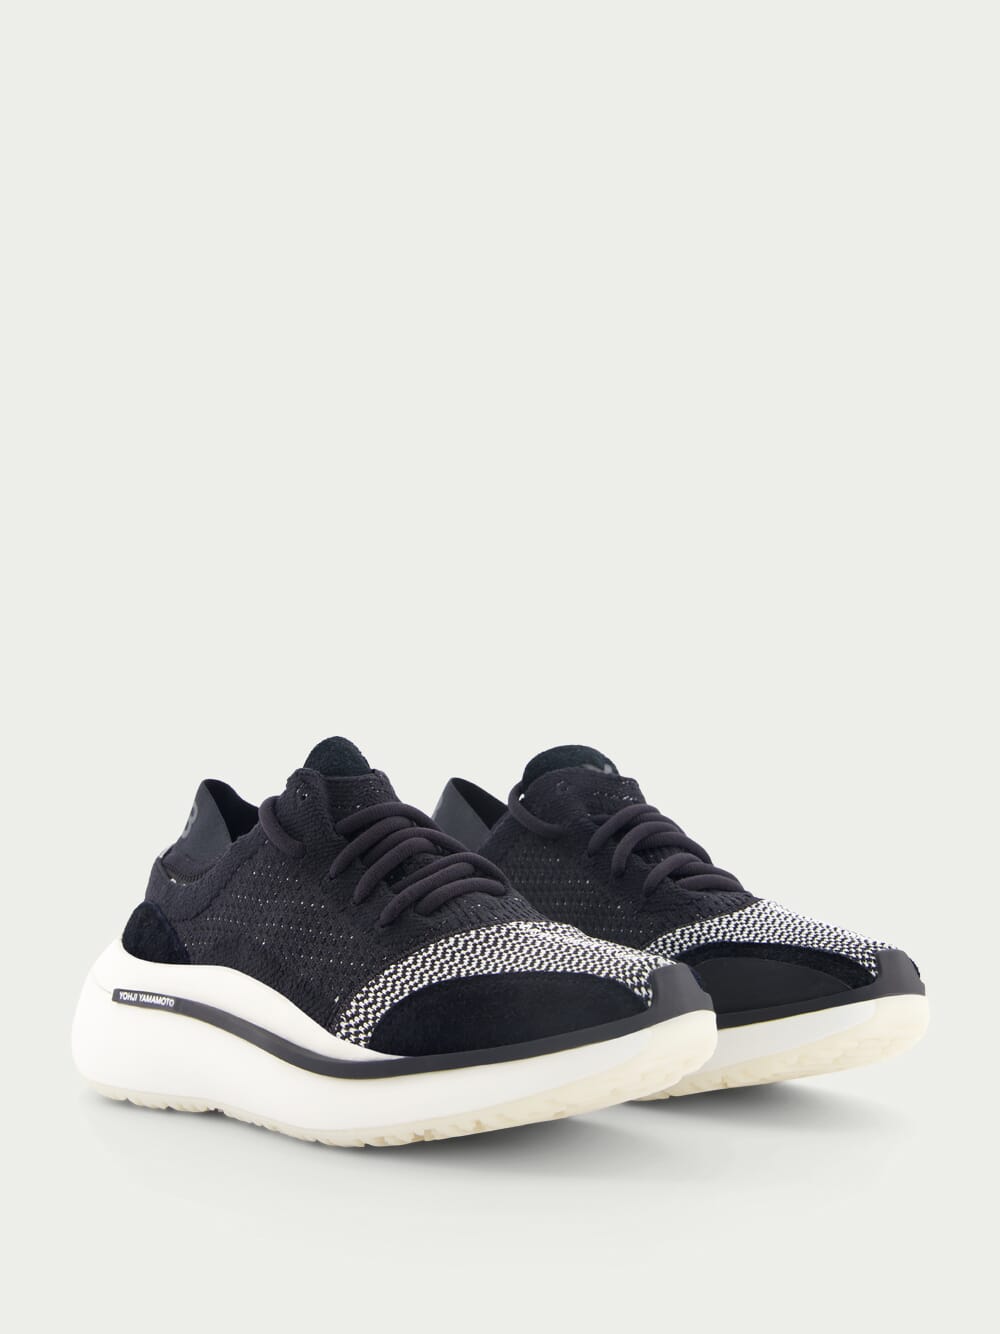 Y-3L-Top Qisan Knit Sneakers at Fashion Clinic